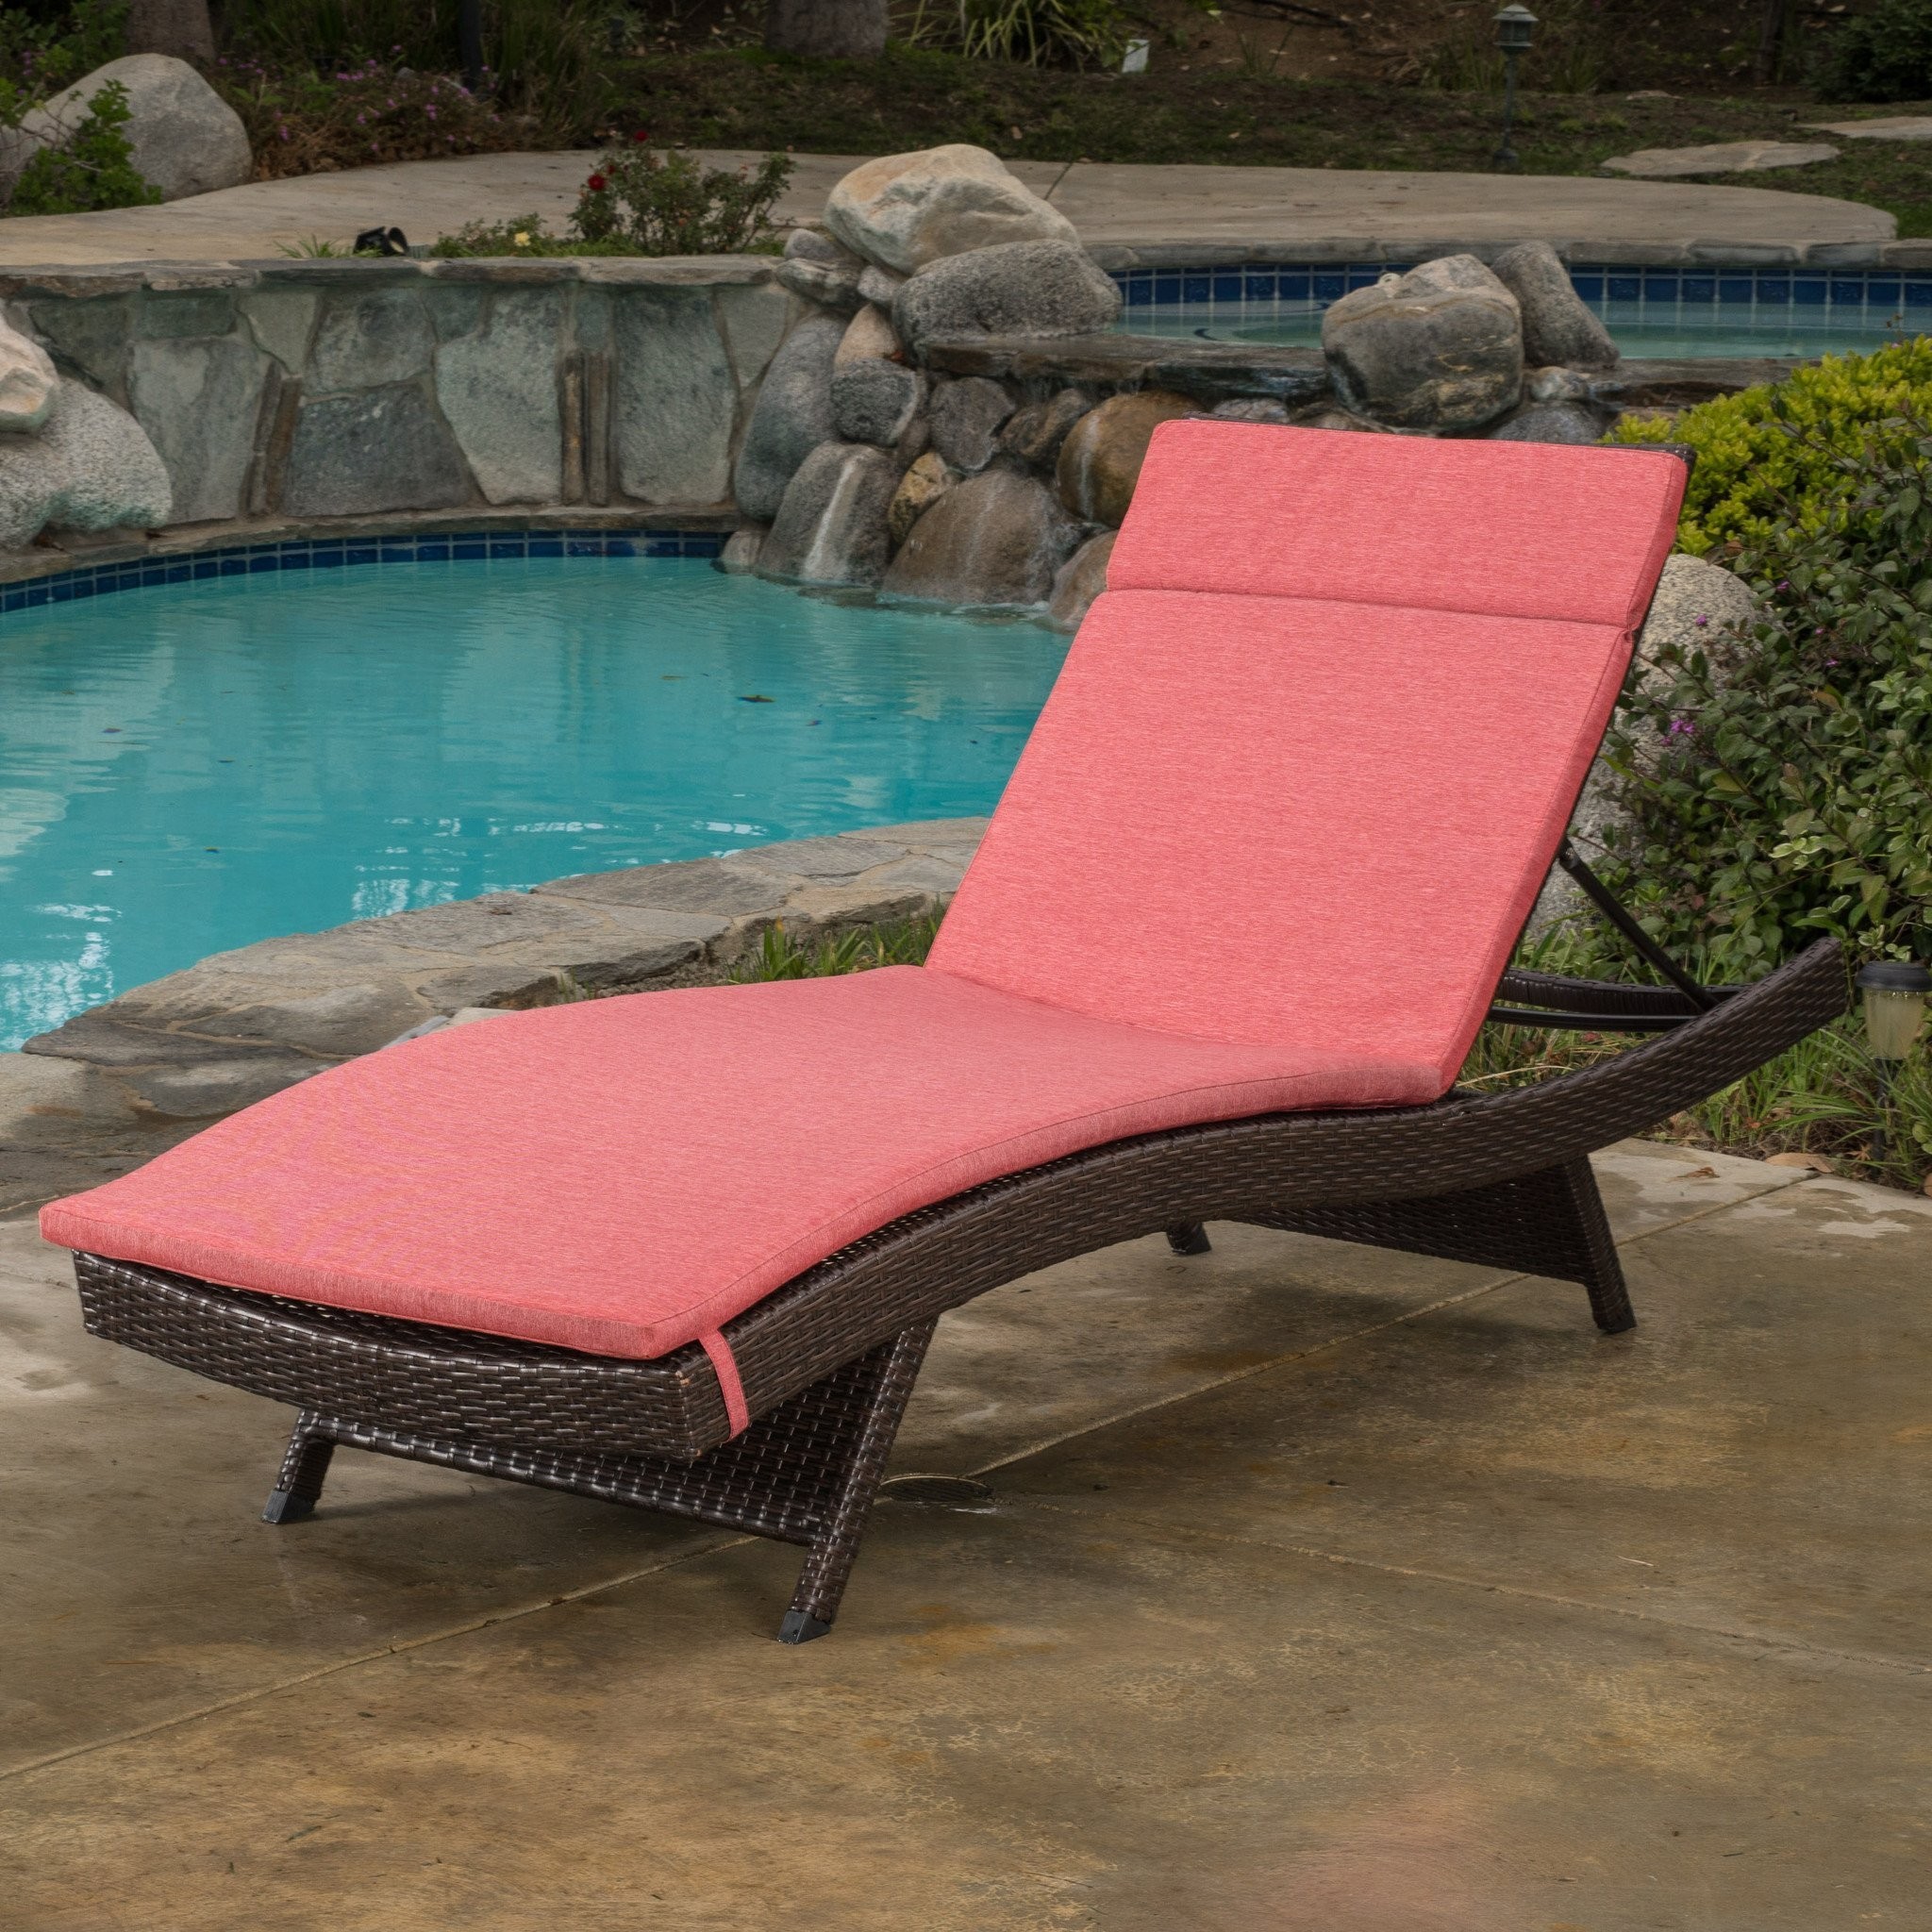 Lakeport Outdoor Adjustable Chaise Lounge Chair w/...